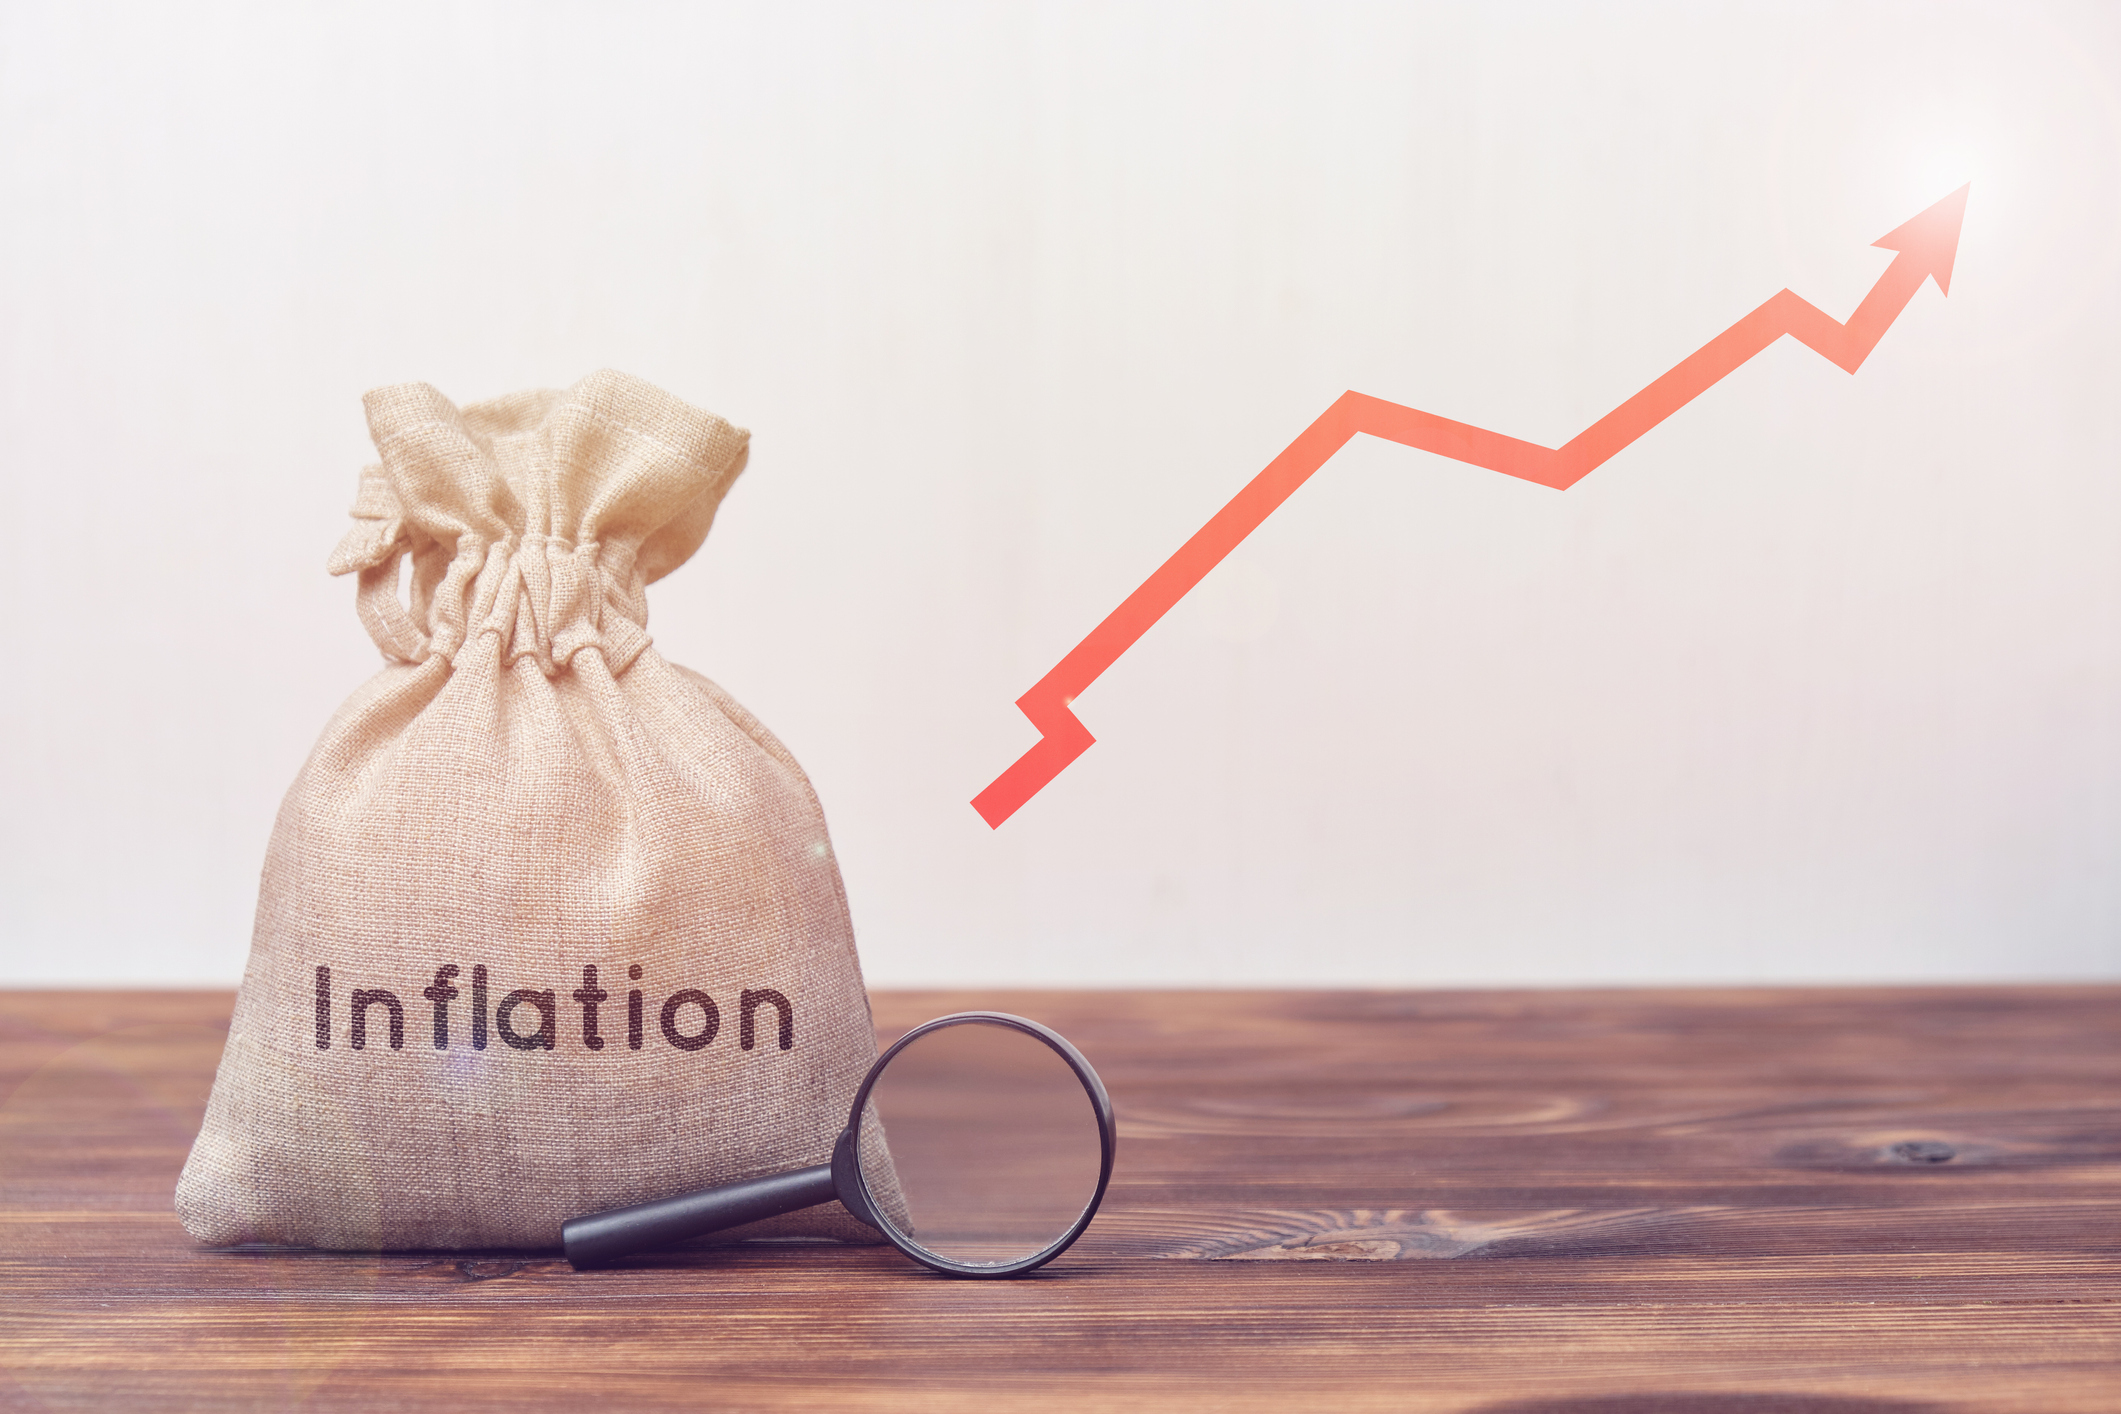 Will We See More Inflation in 2022?